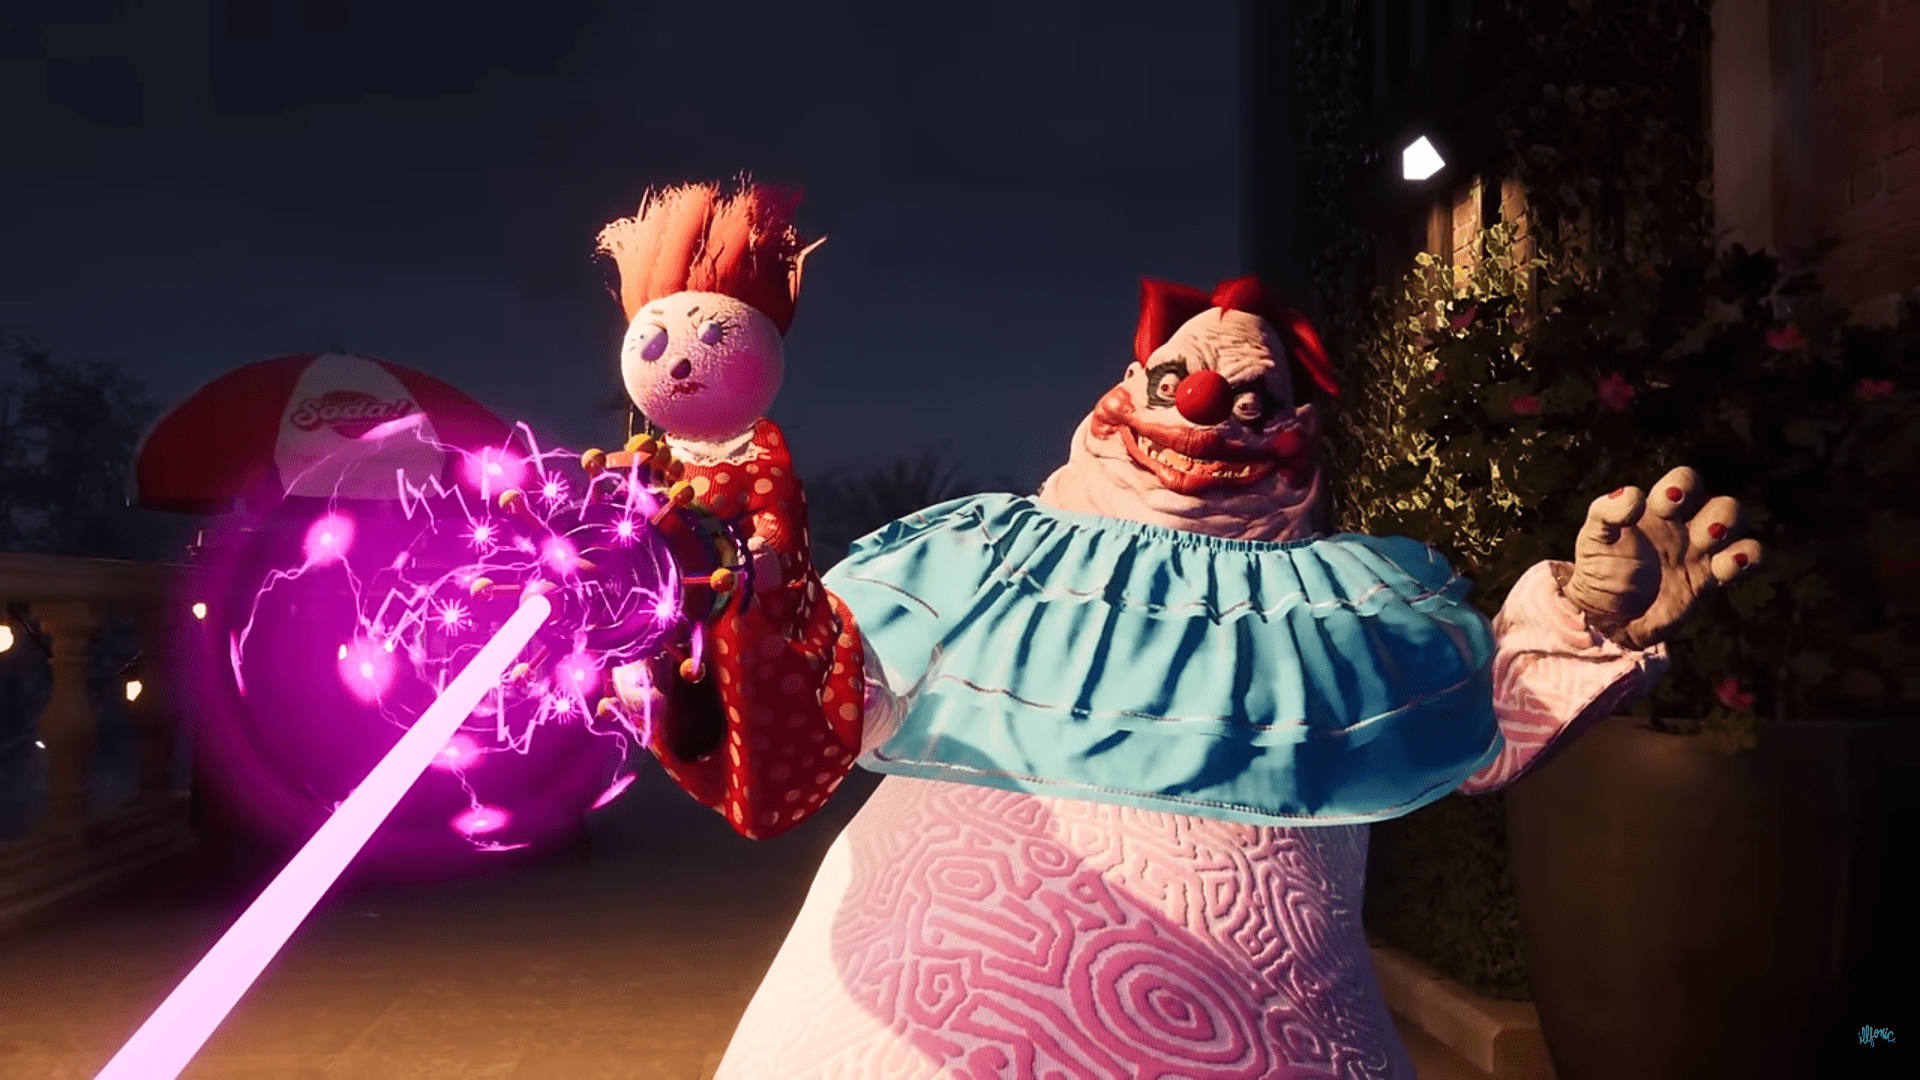 Killer Klowns from Outer Space: The Game release